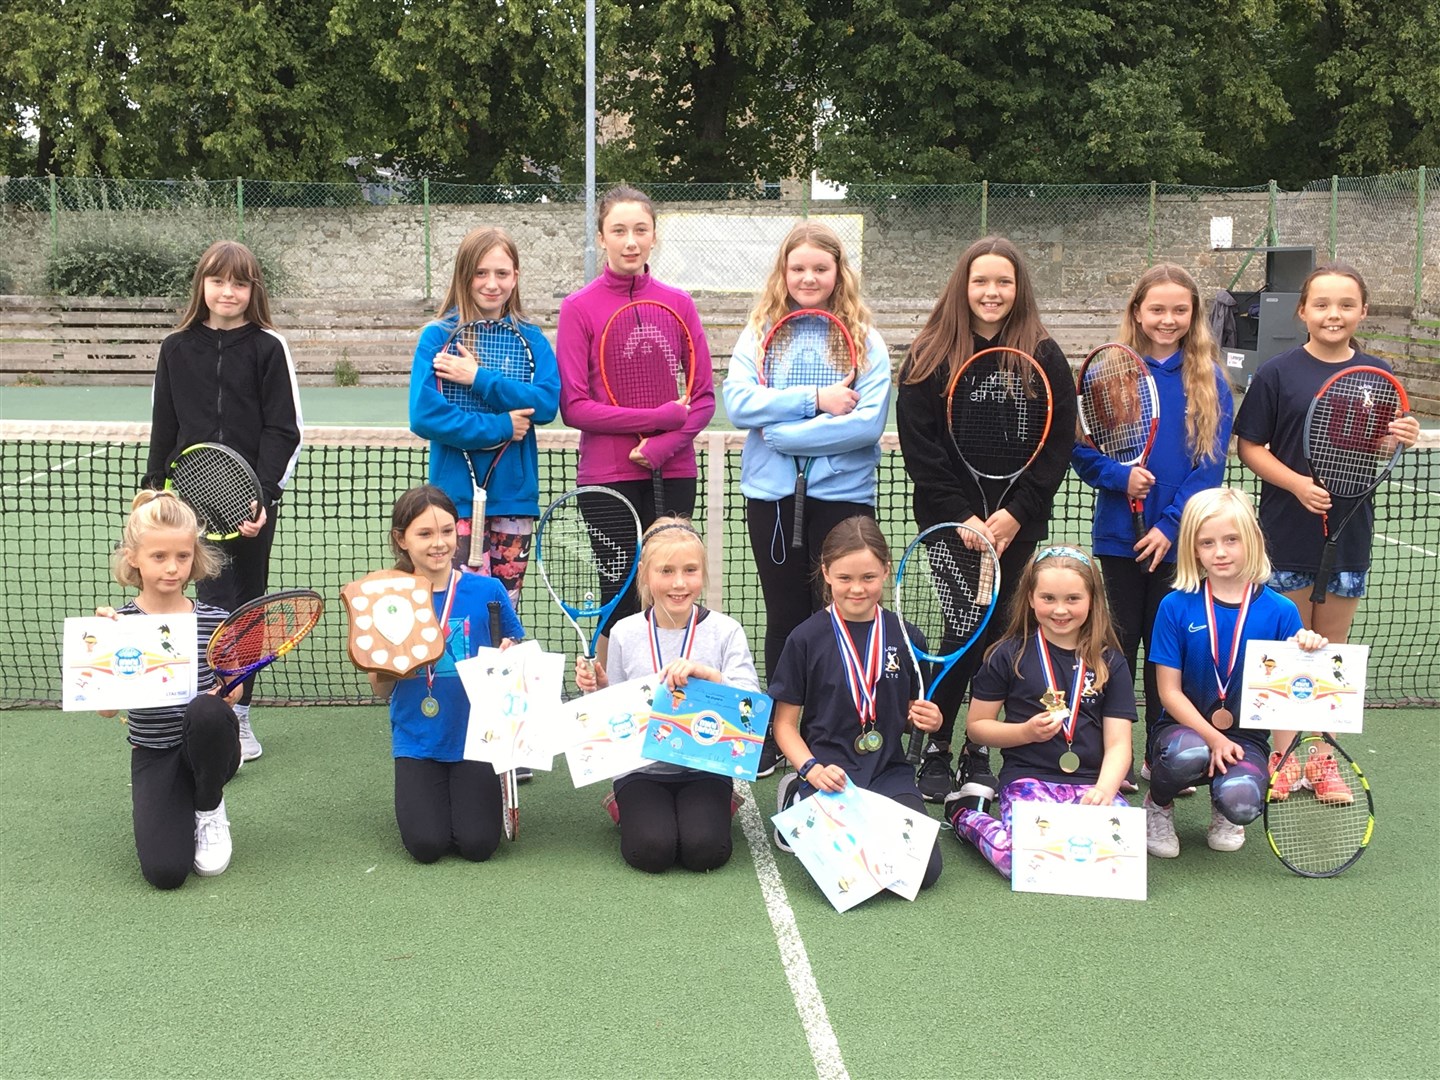 There's plenty young tennis talent at Elgin.